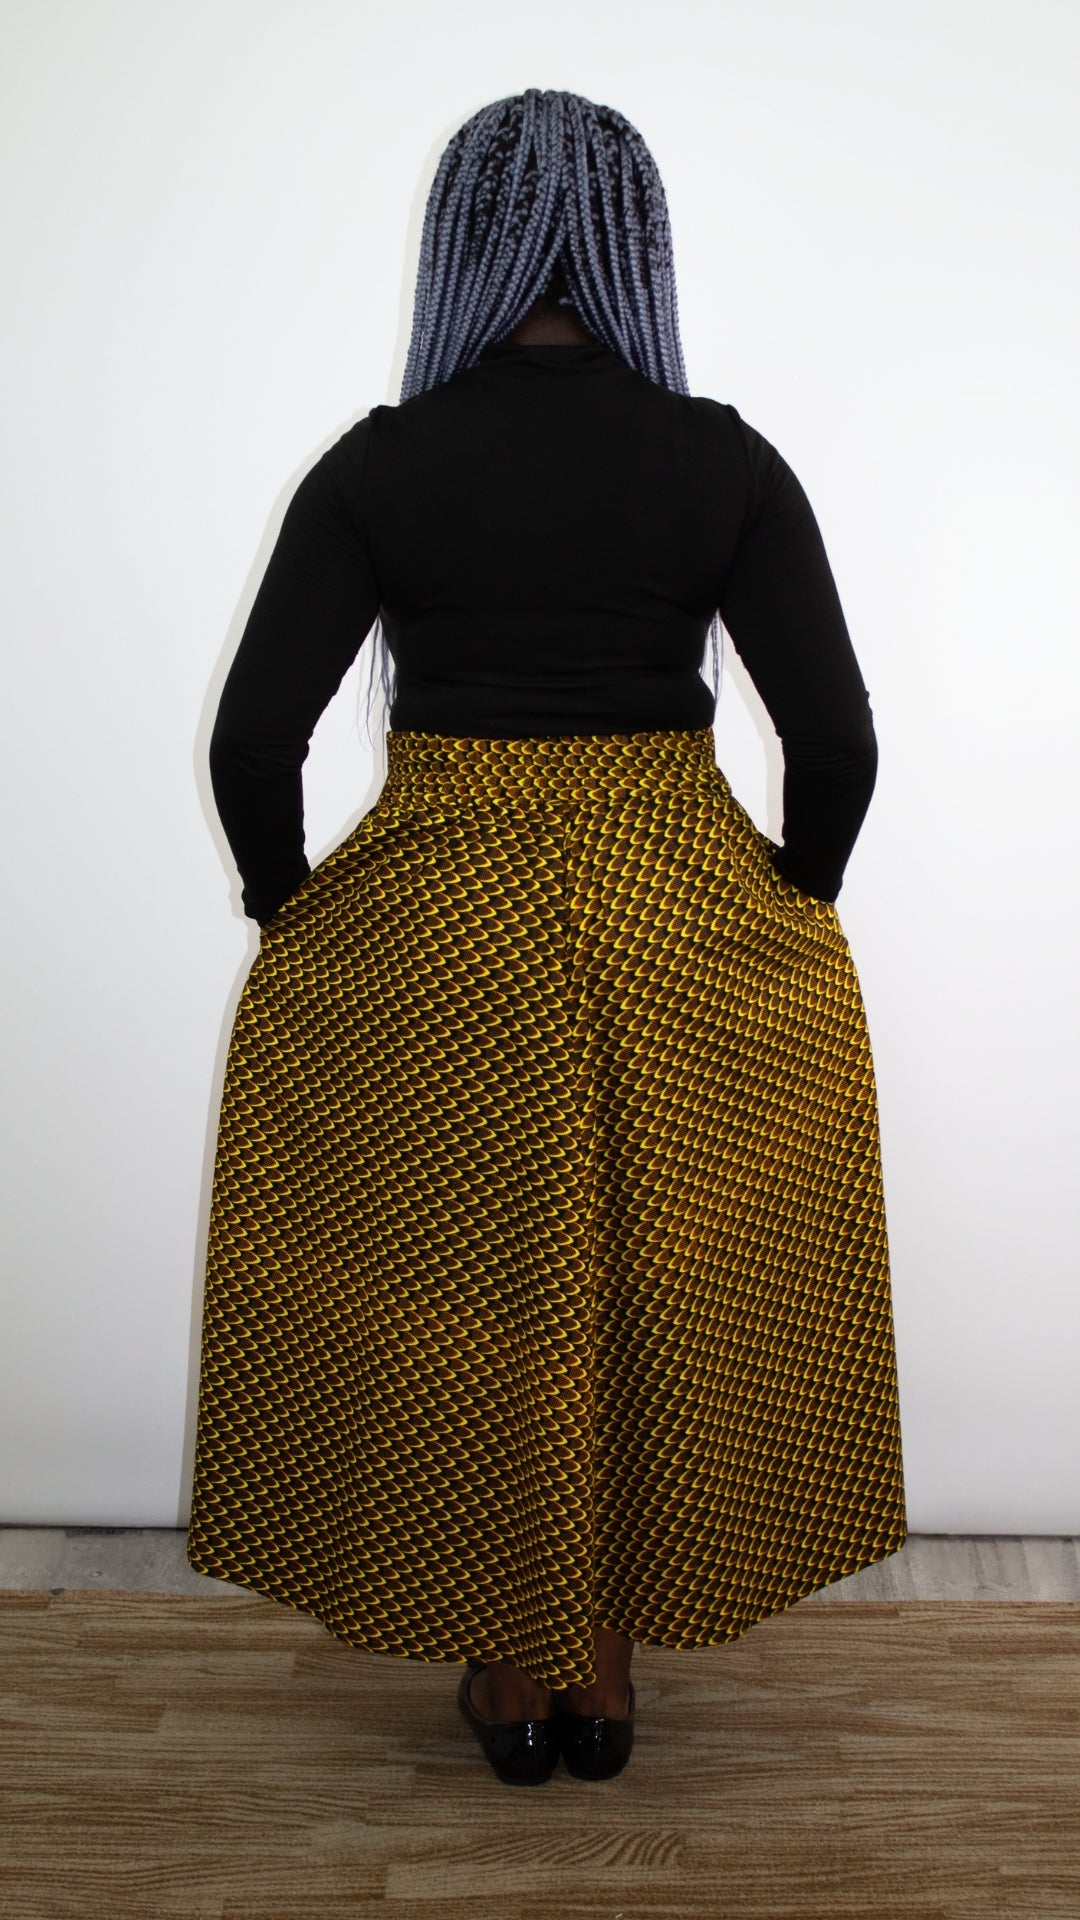 back of a model with vibrant blue hair displays a sleek black turtleneck coupled with a distinctive yellow and black skirt featuring an African print and accentuated by a trendy bow tie belt.